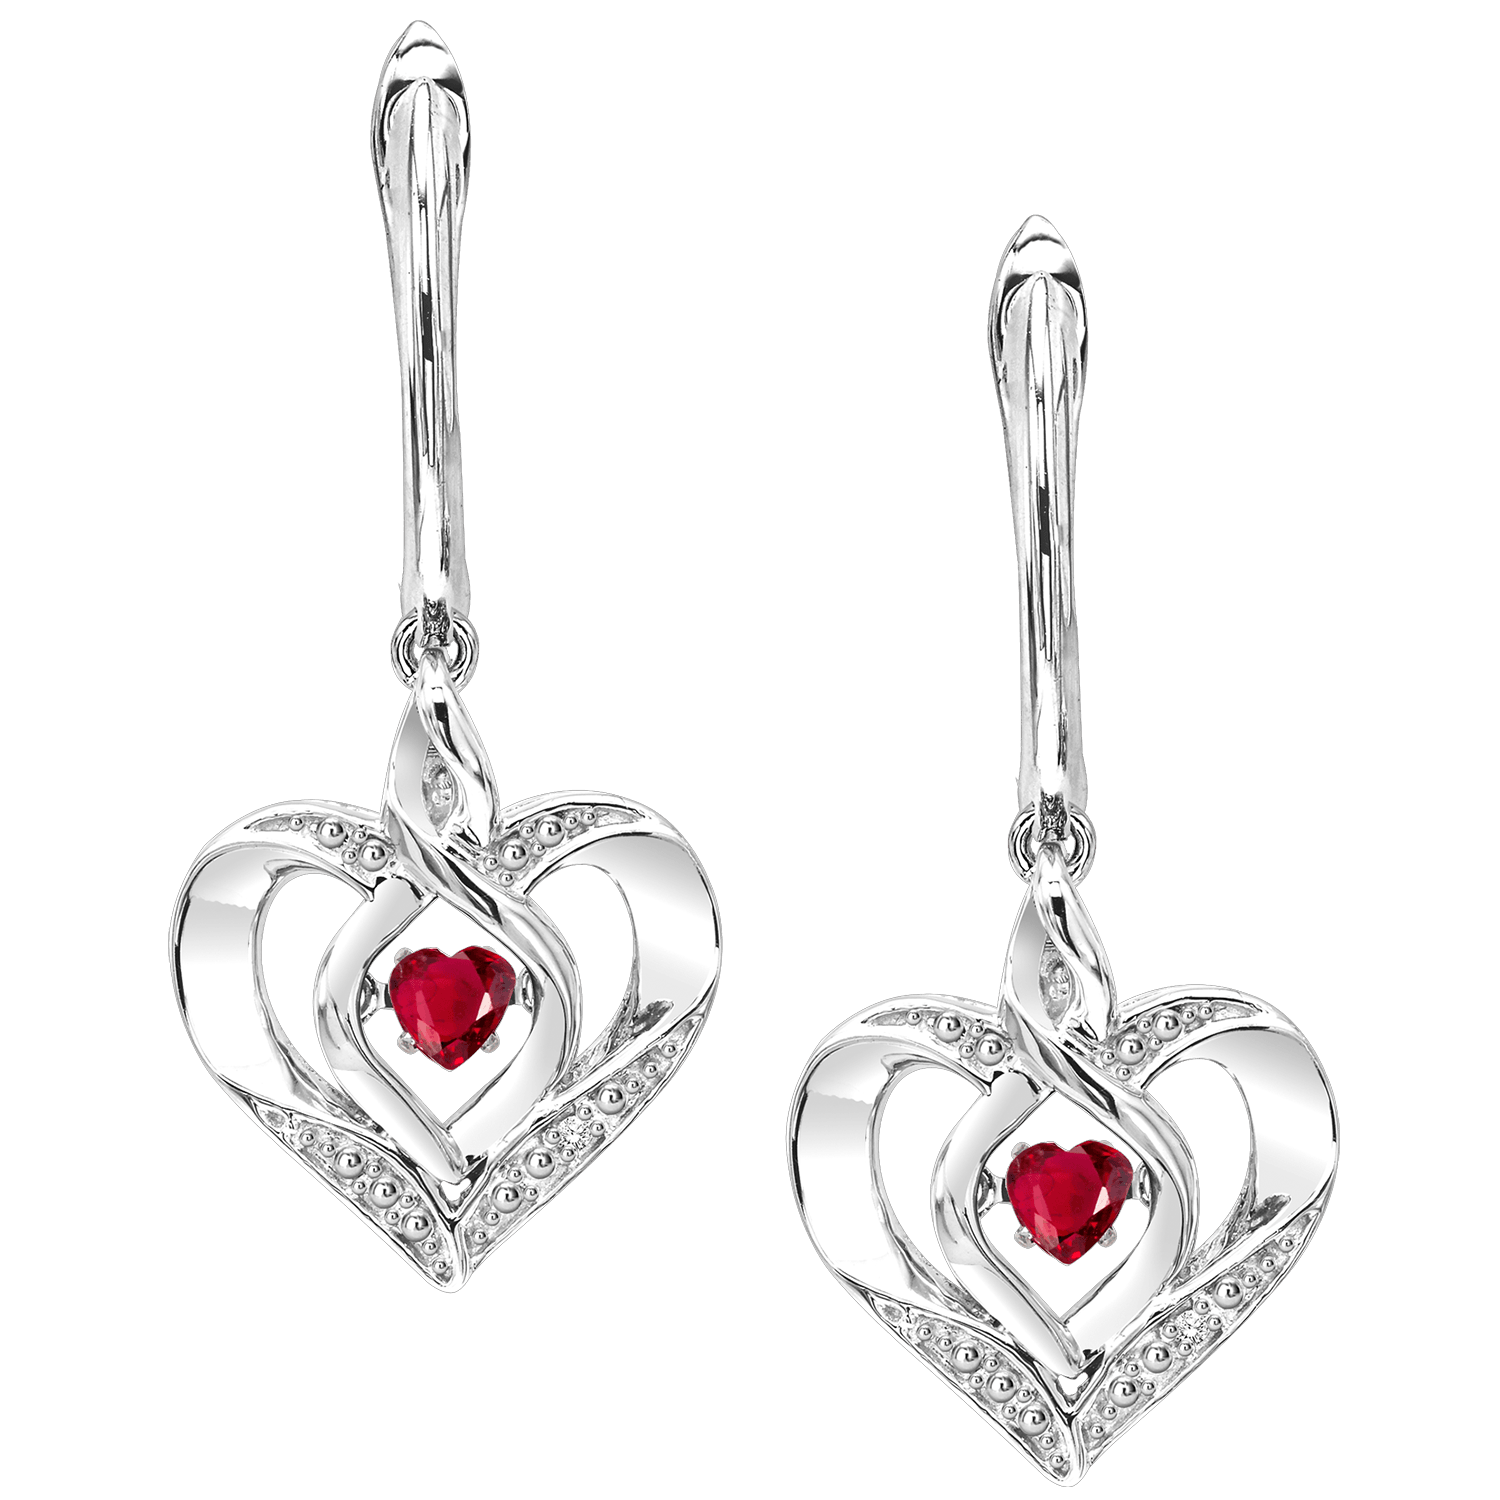 BW James Jewelers Earrings 16 Page Christmas Catalog Offer SS Diamond ROL-Birthst Heart Ruby Basics Earring 1/165Ct